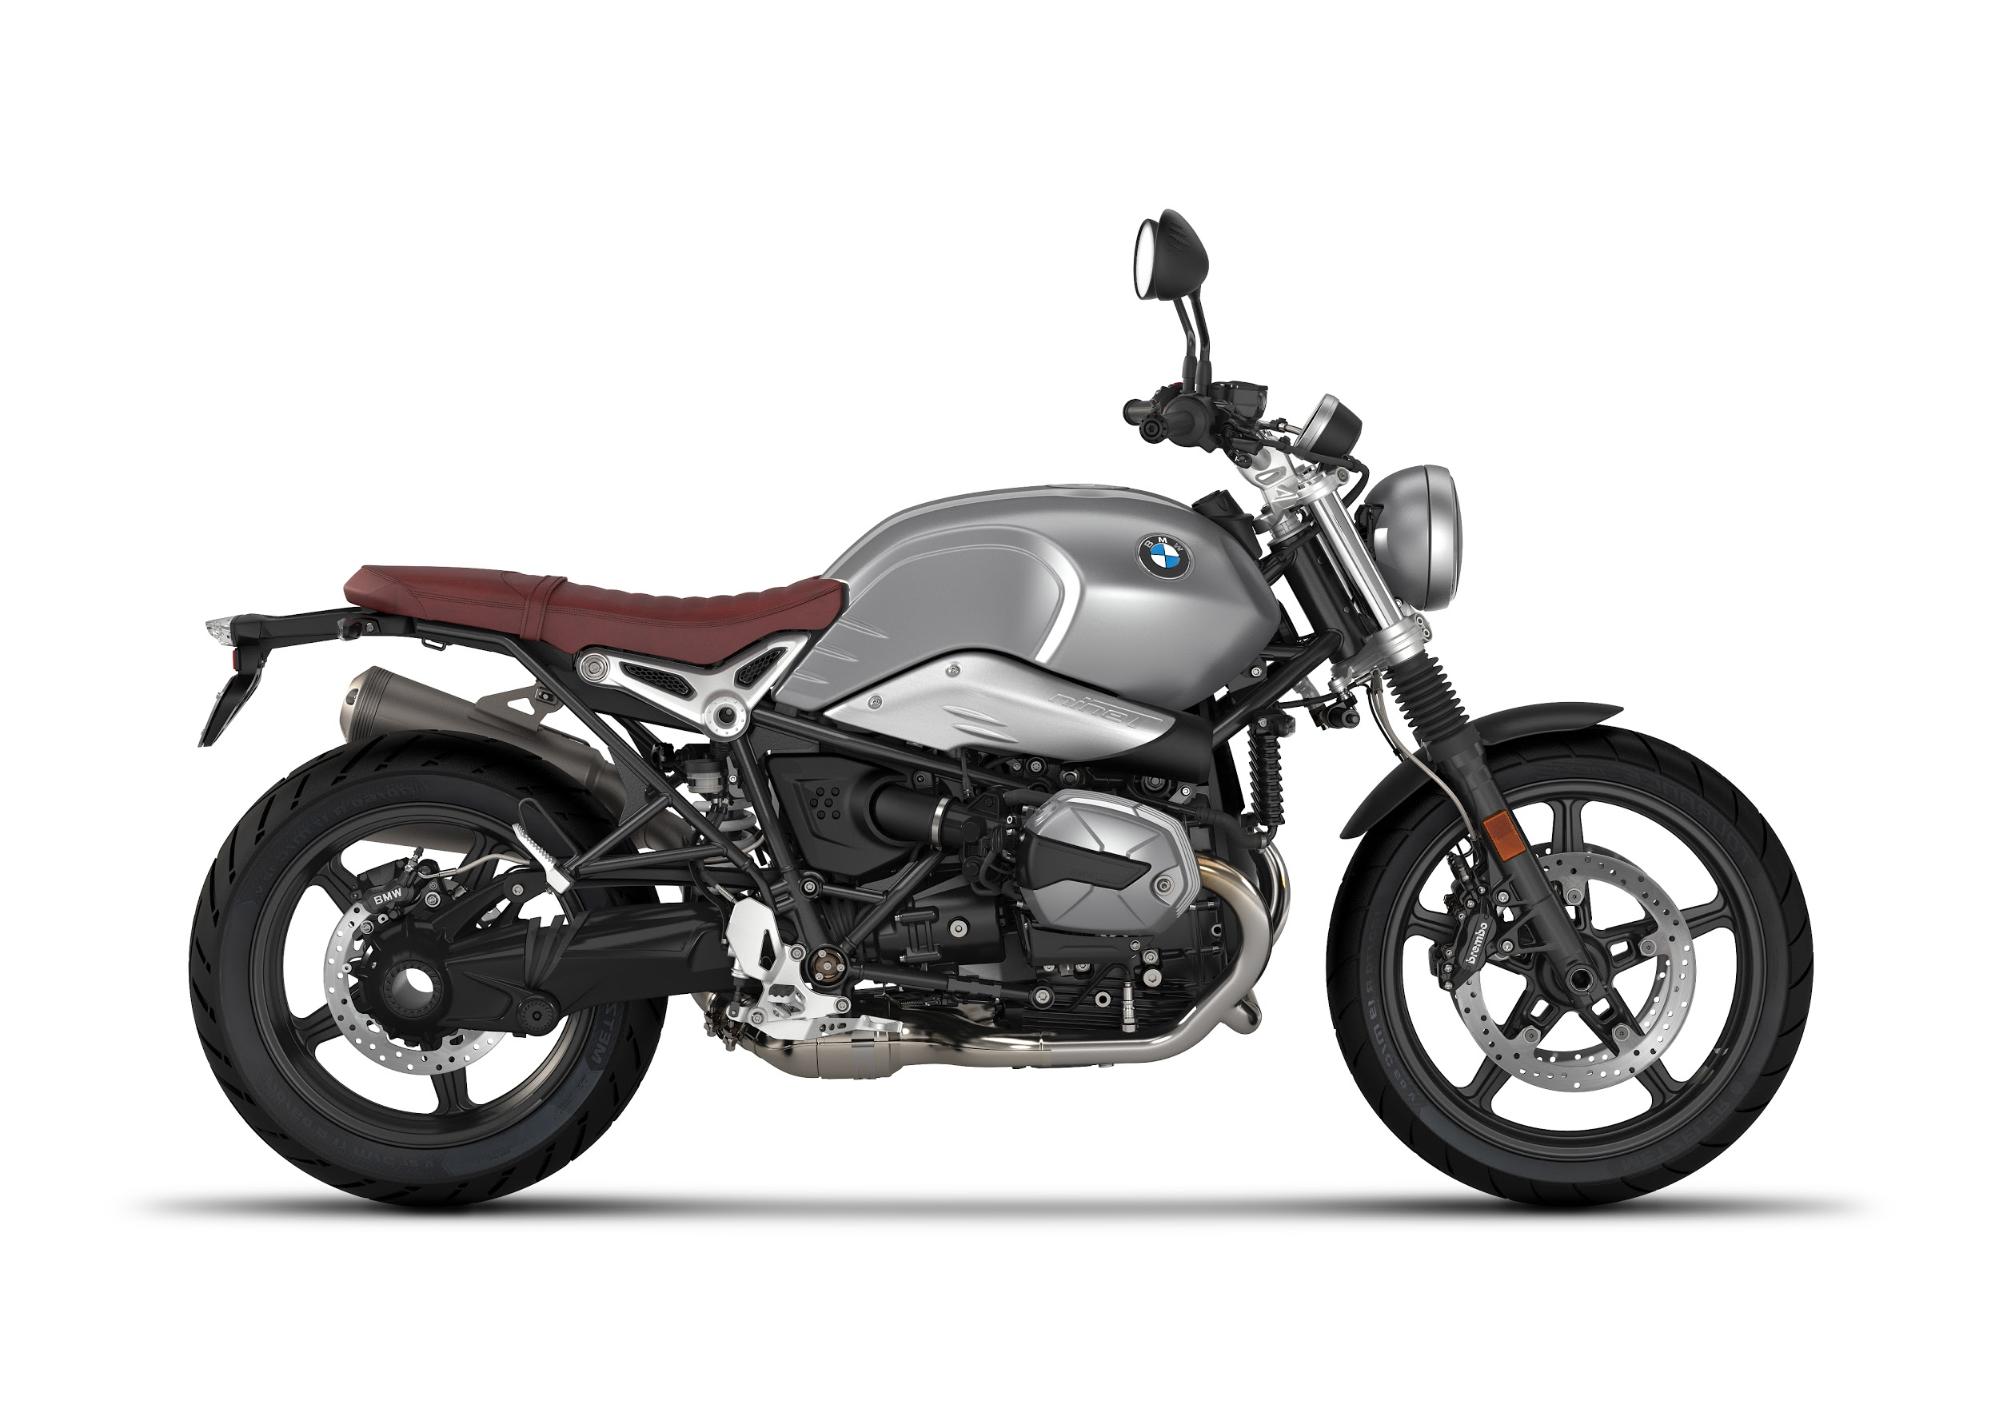 The 21 Bmw Motorcycle Lineup Our Take On Each Model Webbikeworld